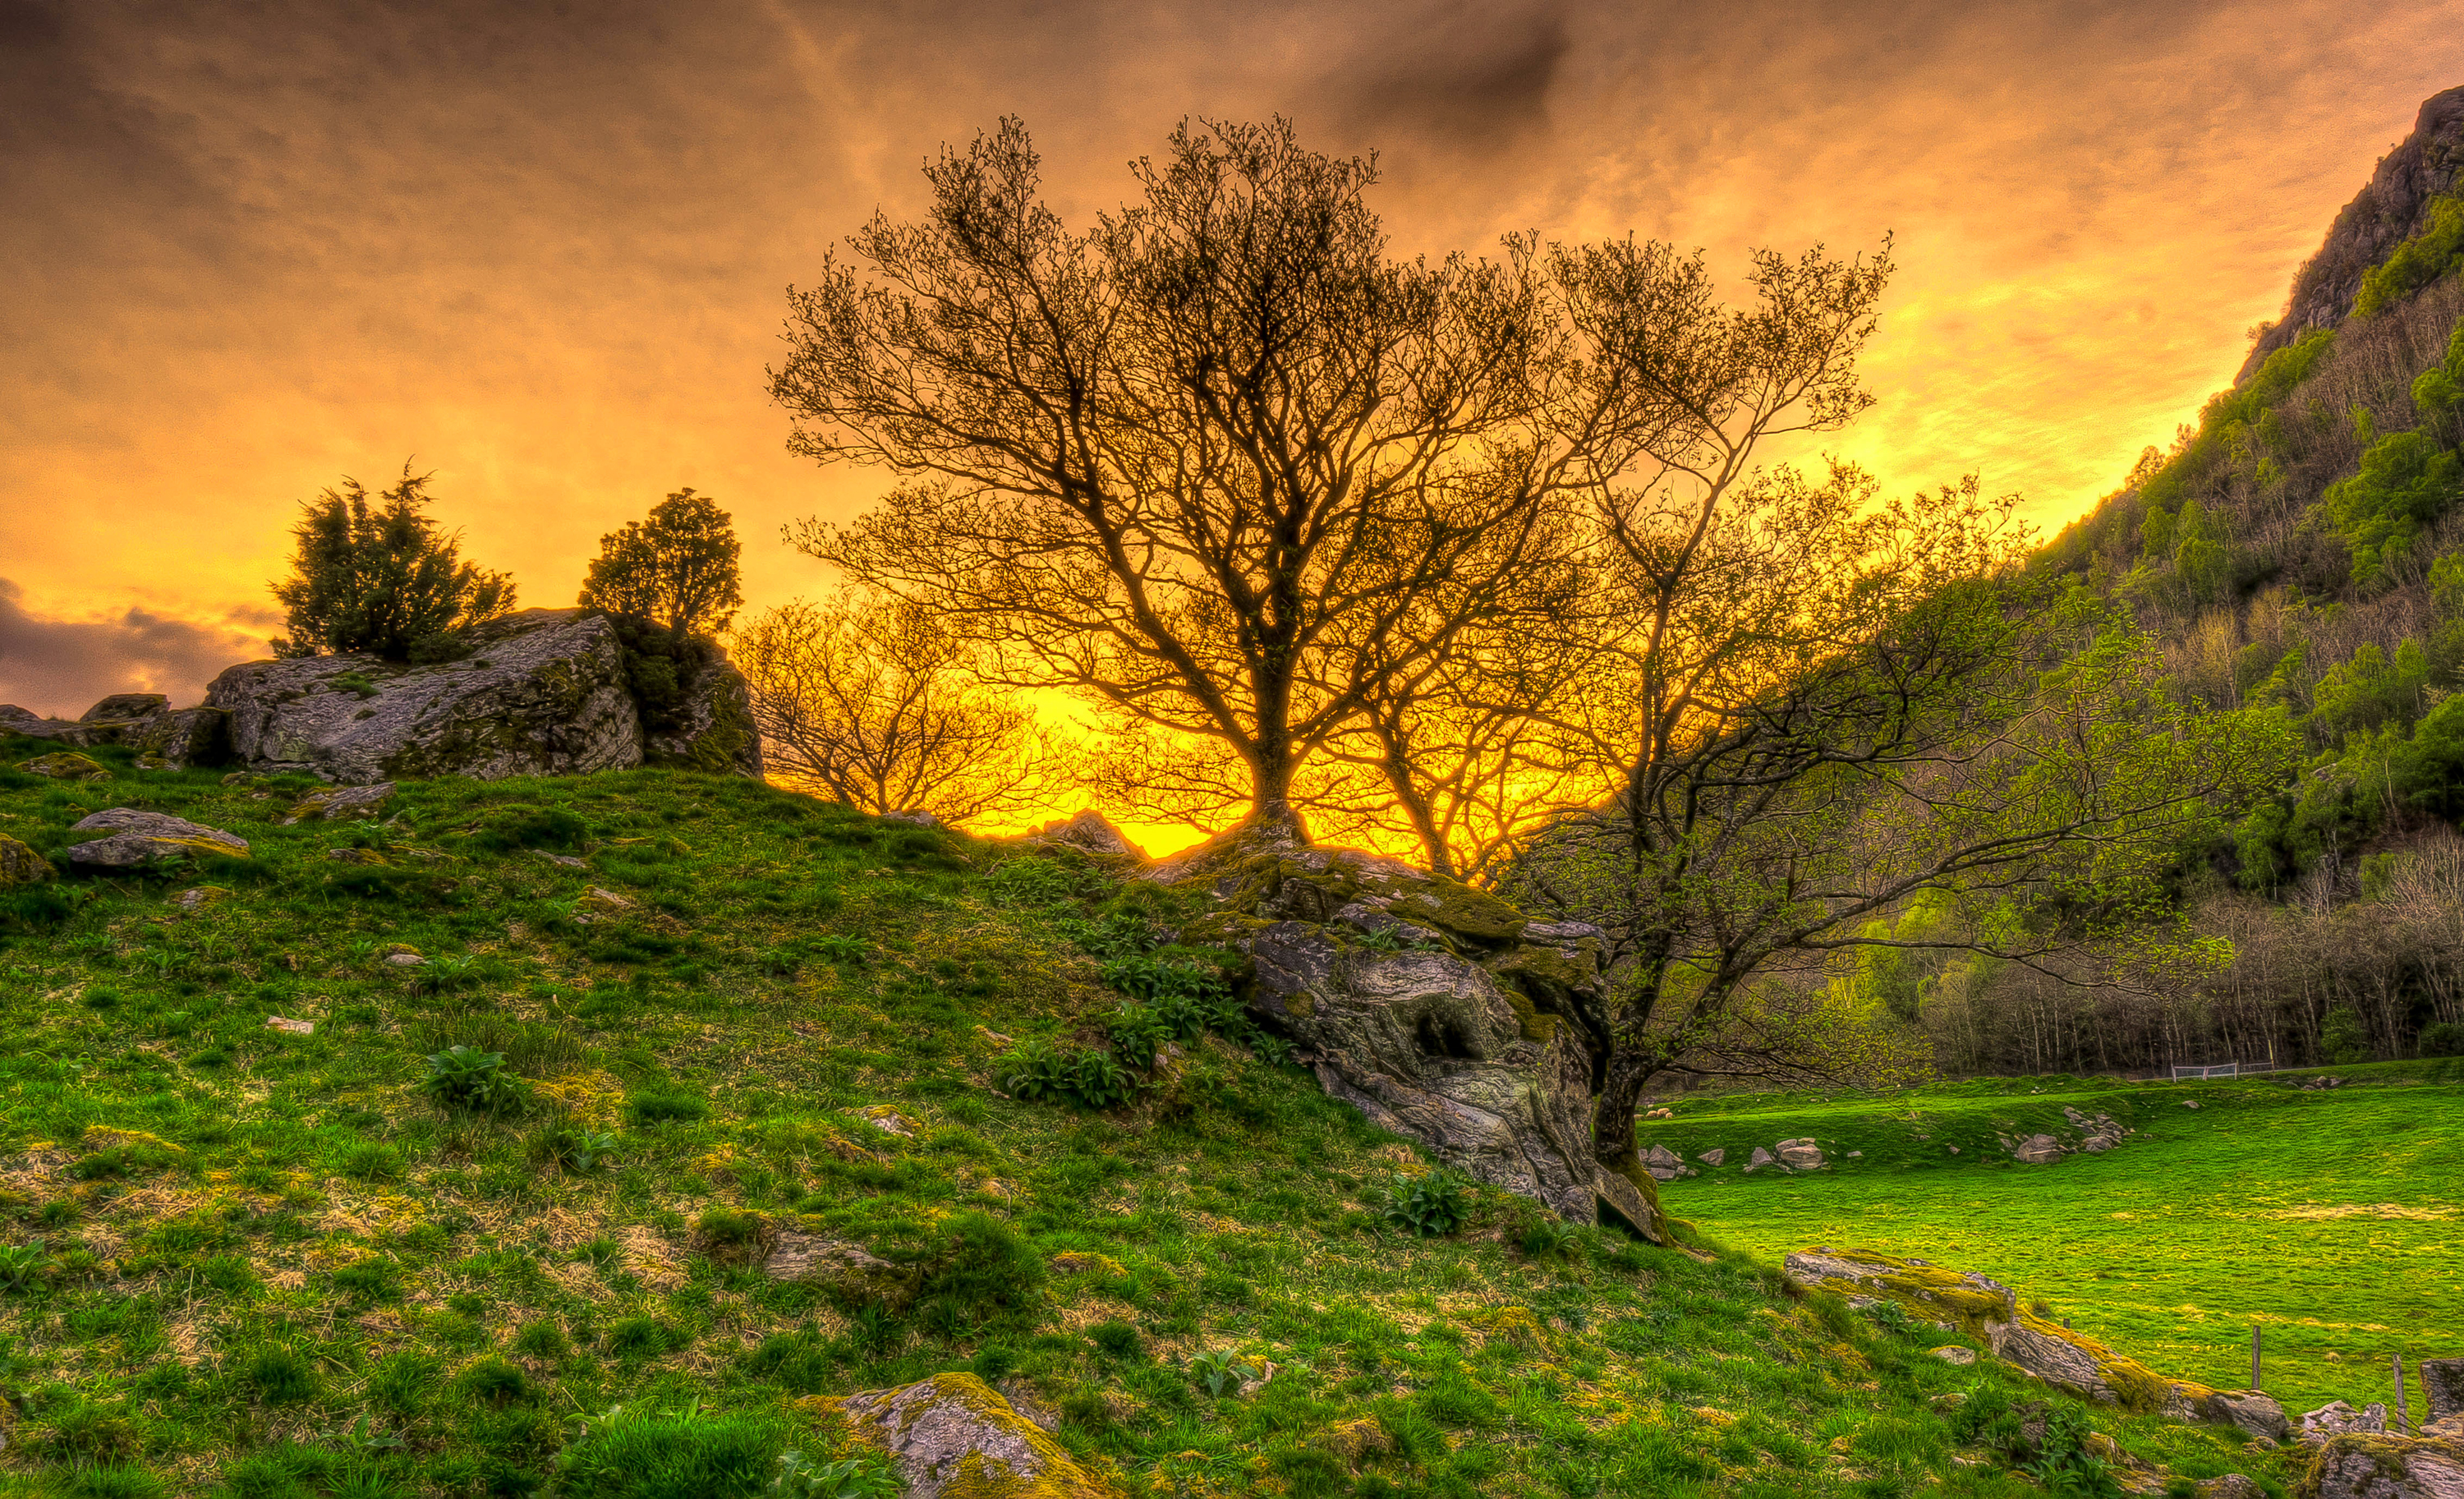 New Lock Screen Wallpapers landscape, nature, trees, grass, hdr